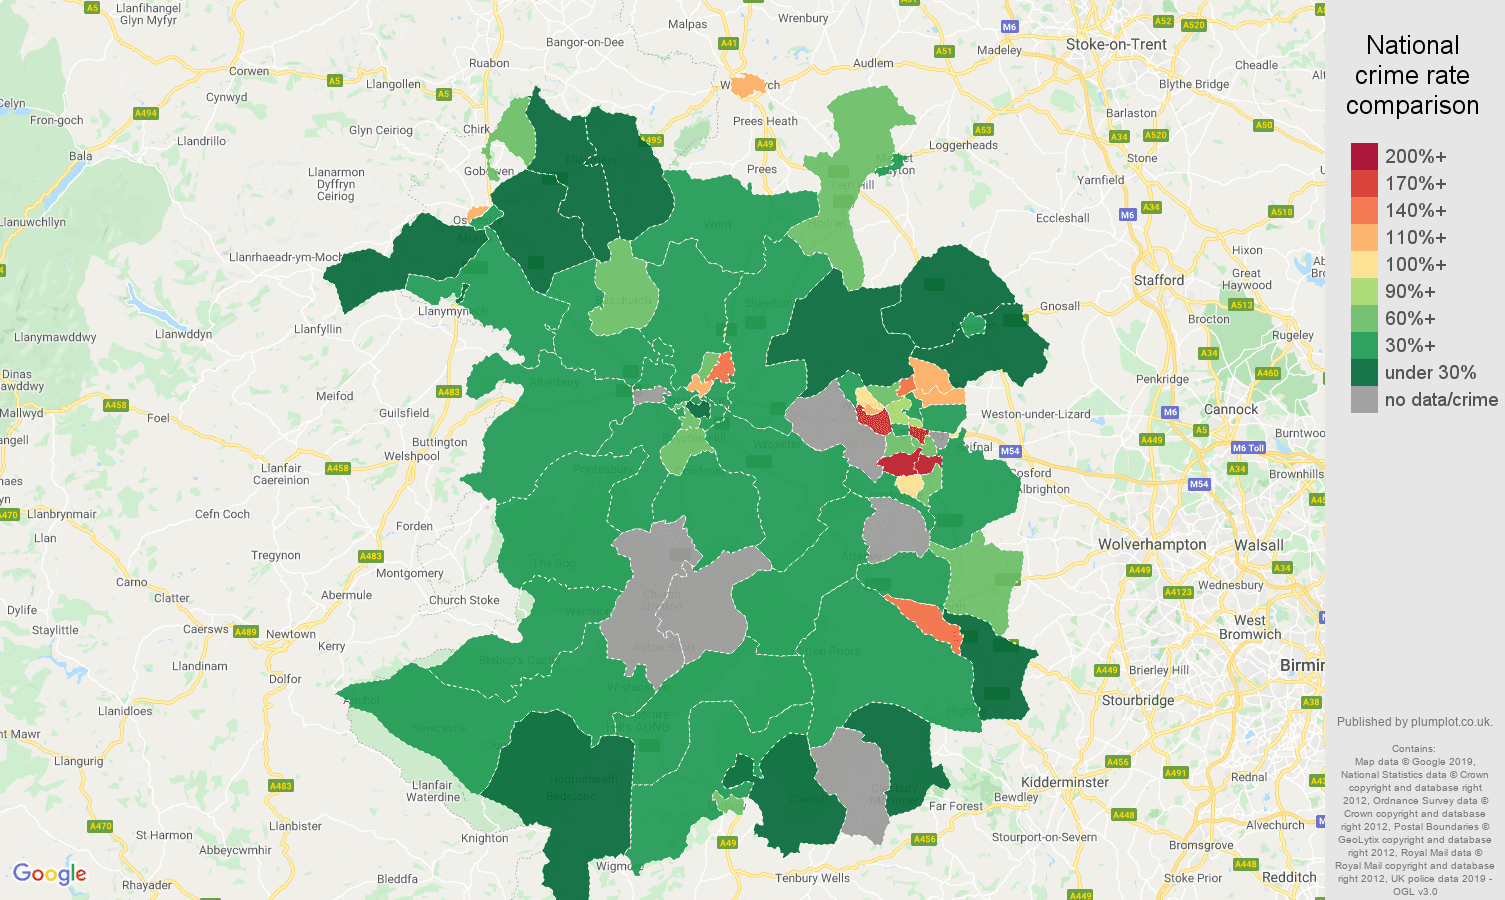 Shropshire other crime rate comparison map